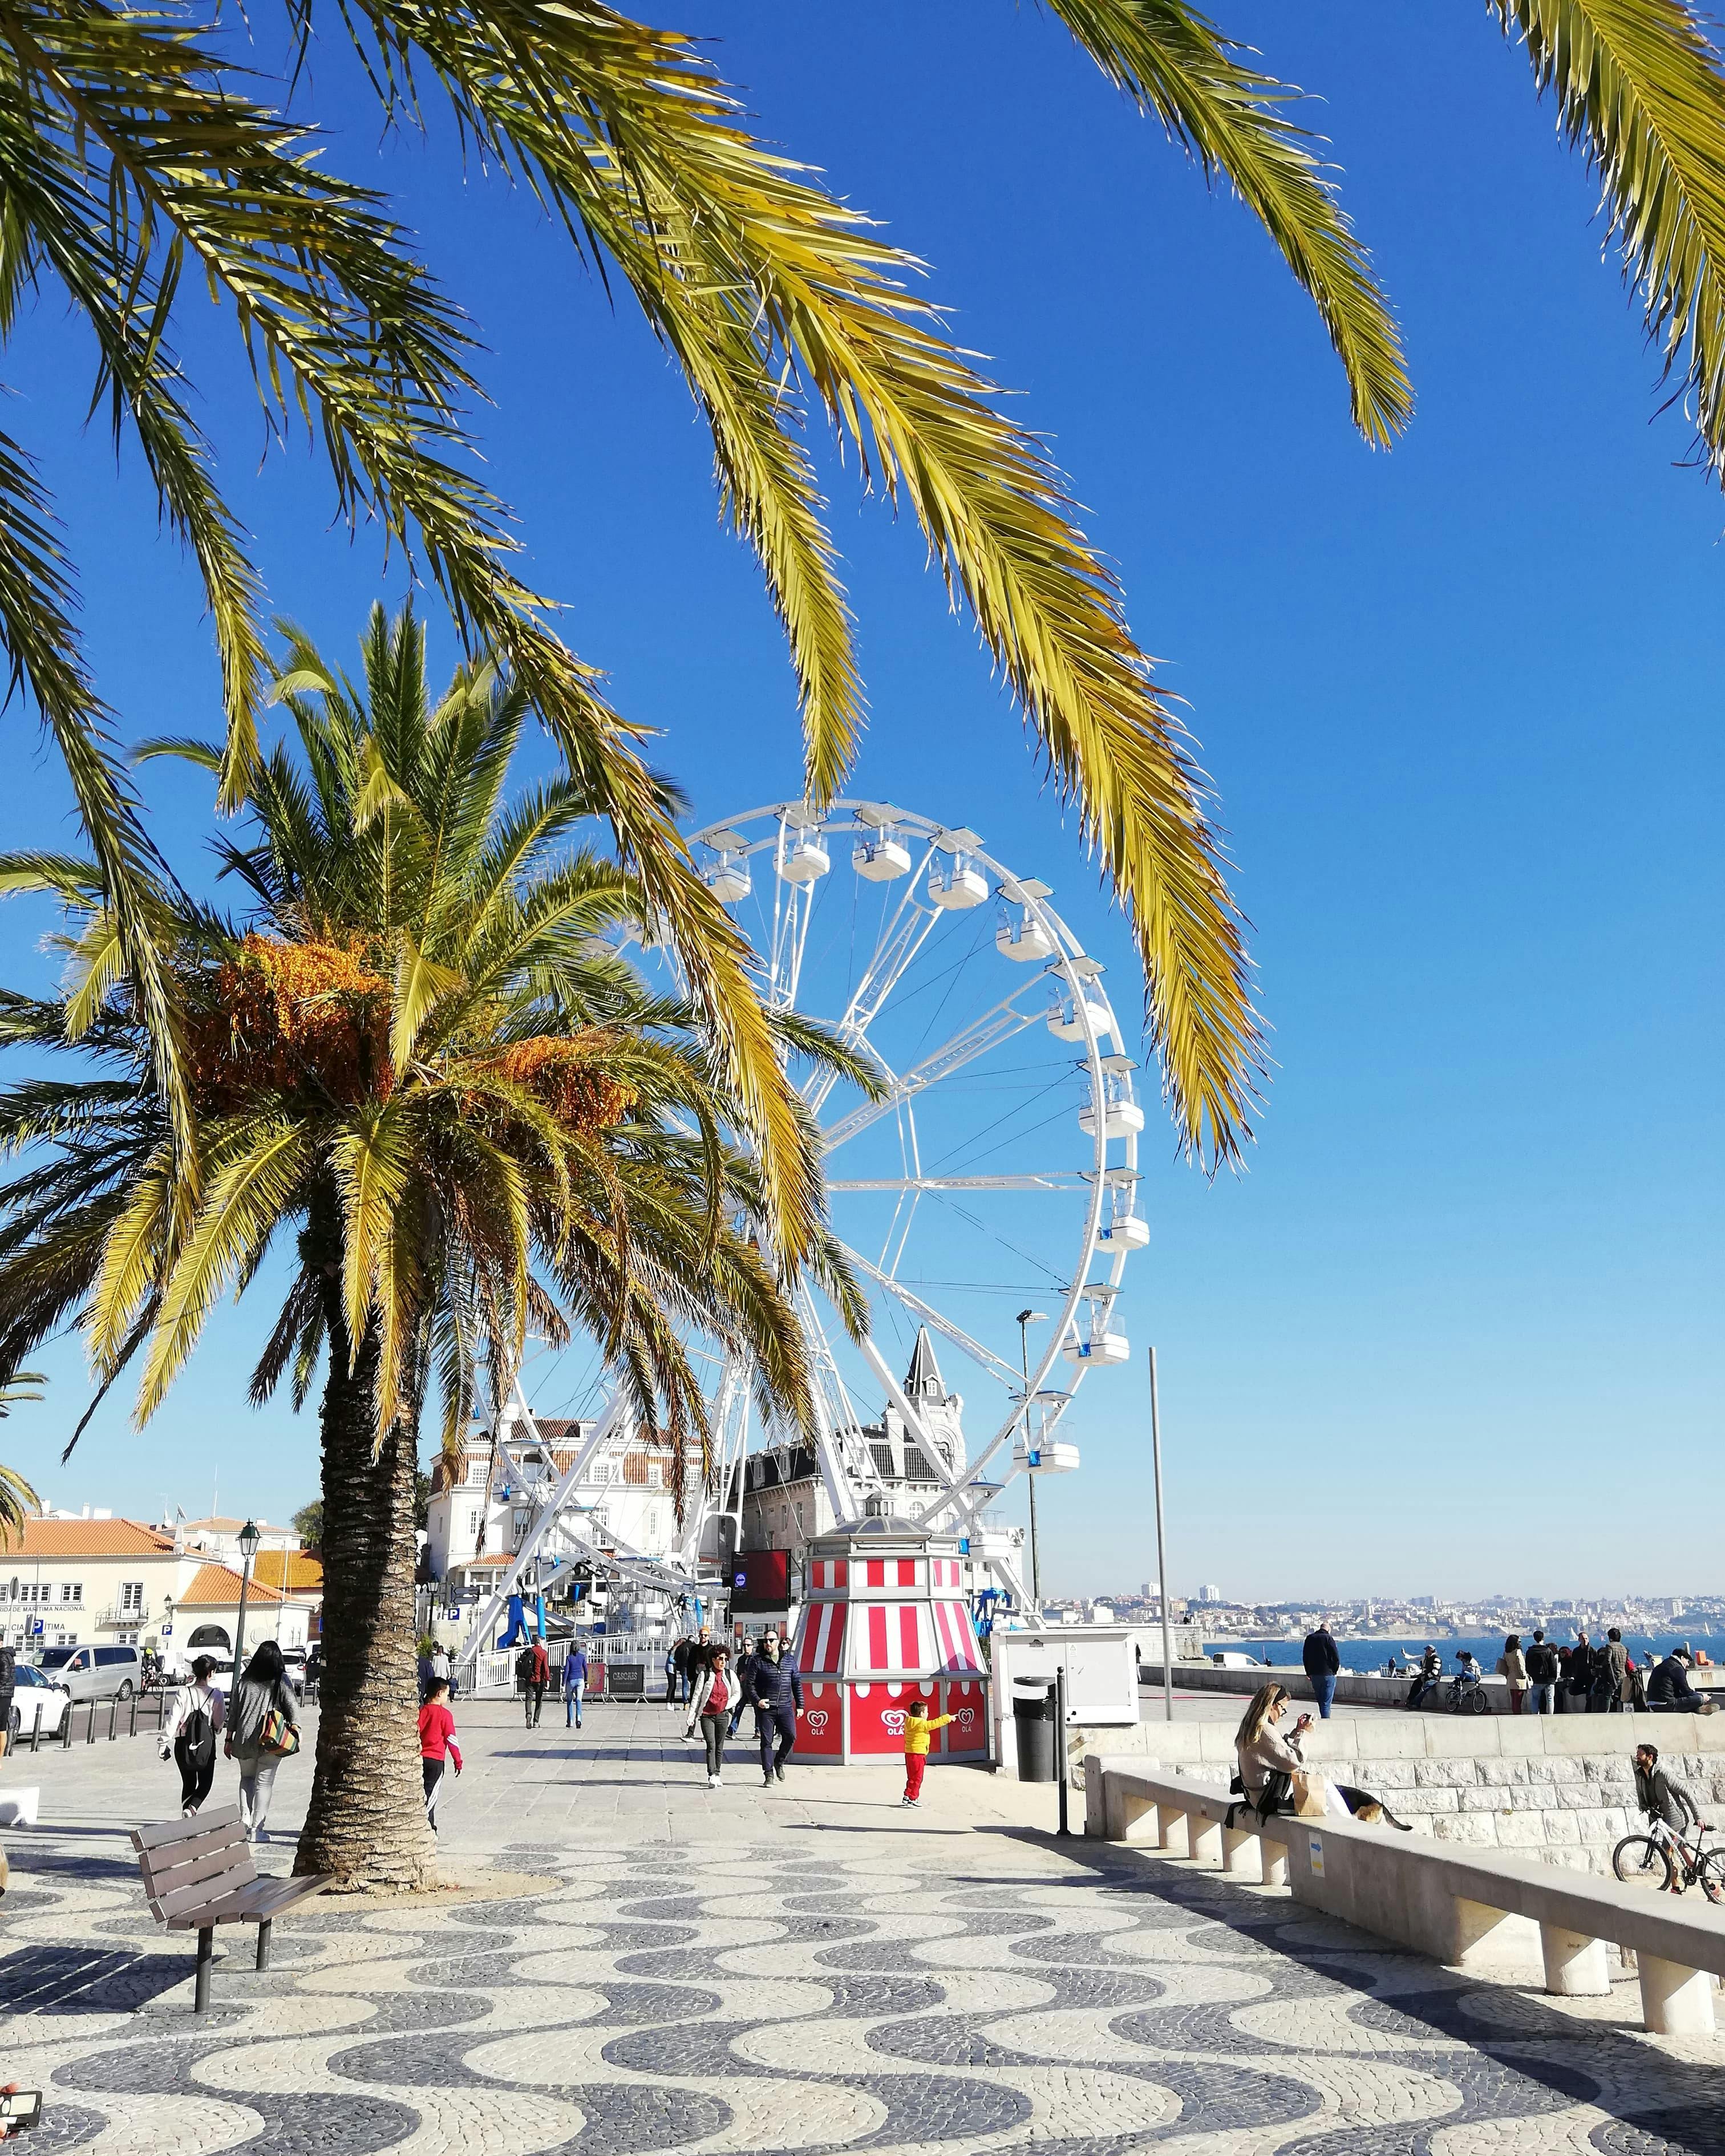 view of the ferris wheel in cascais